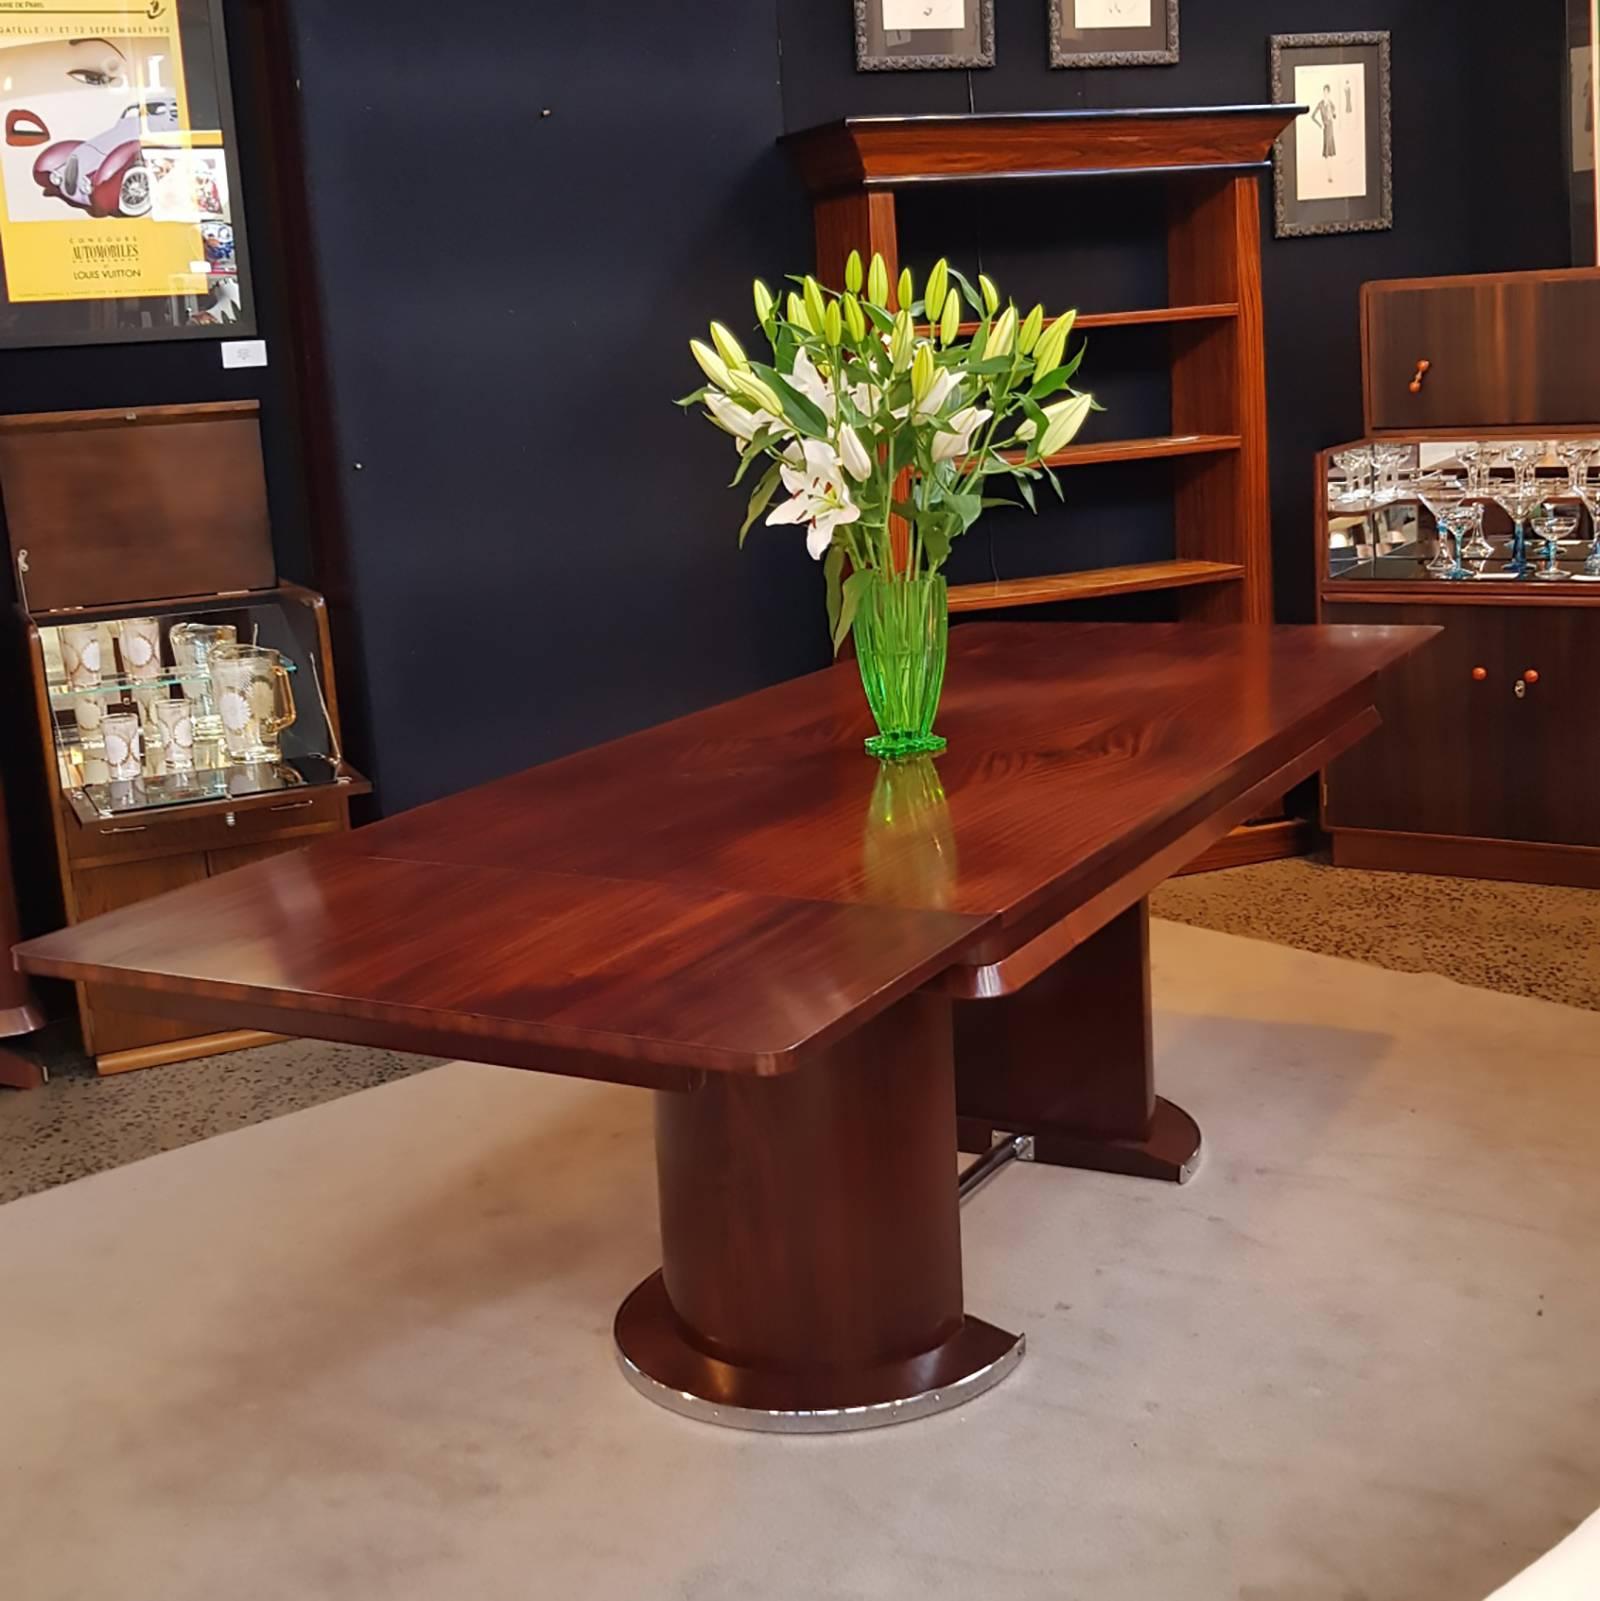 A French Art Deco extendable dining table in Macassar wood, incl. two Leaves, all made with intensive attention to detail. The condition is immaculate with a slight soft age patina. The top surface is quartered veneer so the table centre area is